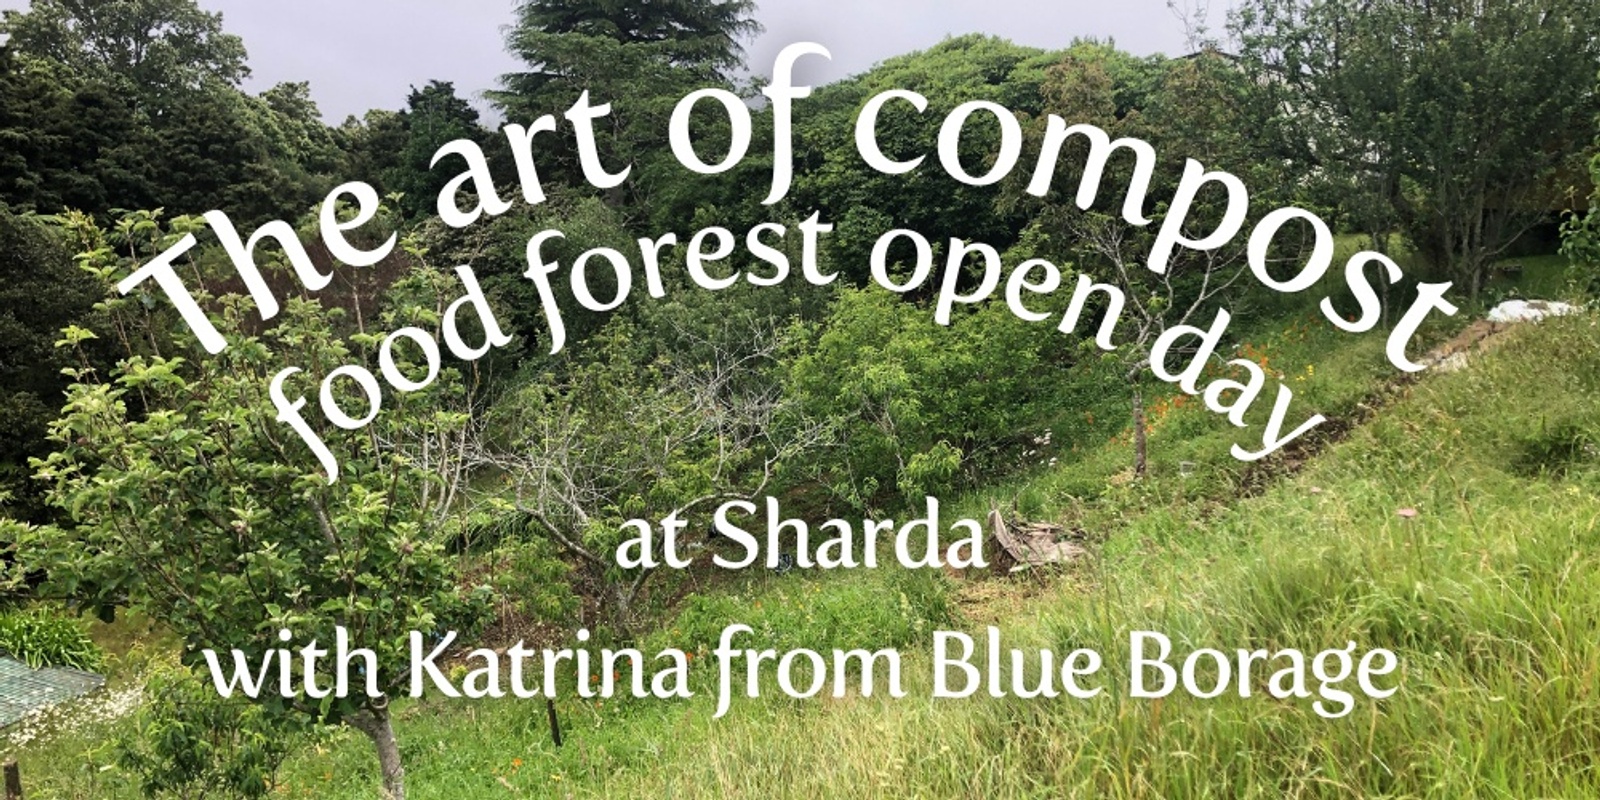 Banner image for The Art of Composting. Food forest open day at Sharda